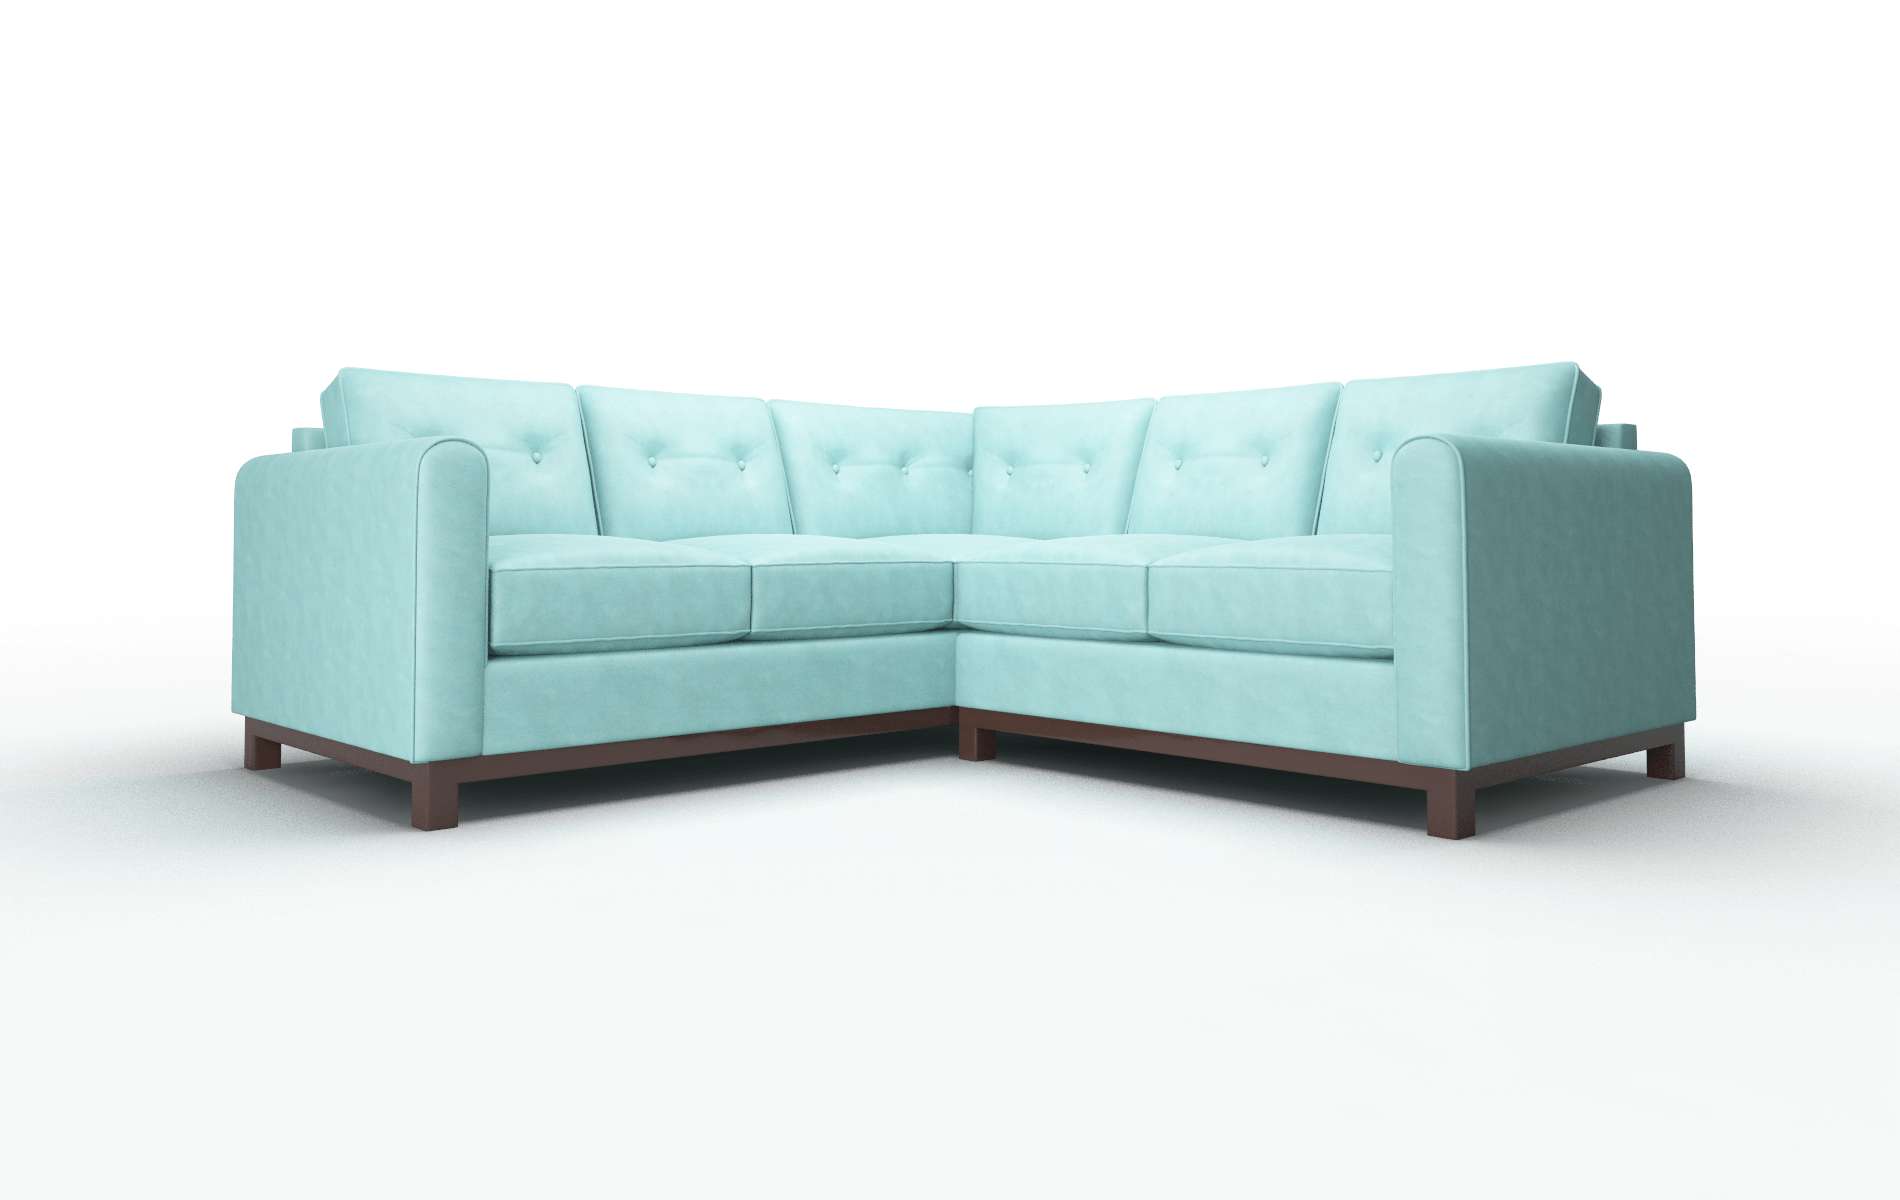 Rio Curious Turquoise Sectional espresso legs 1